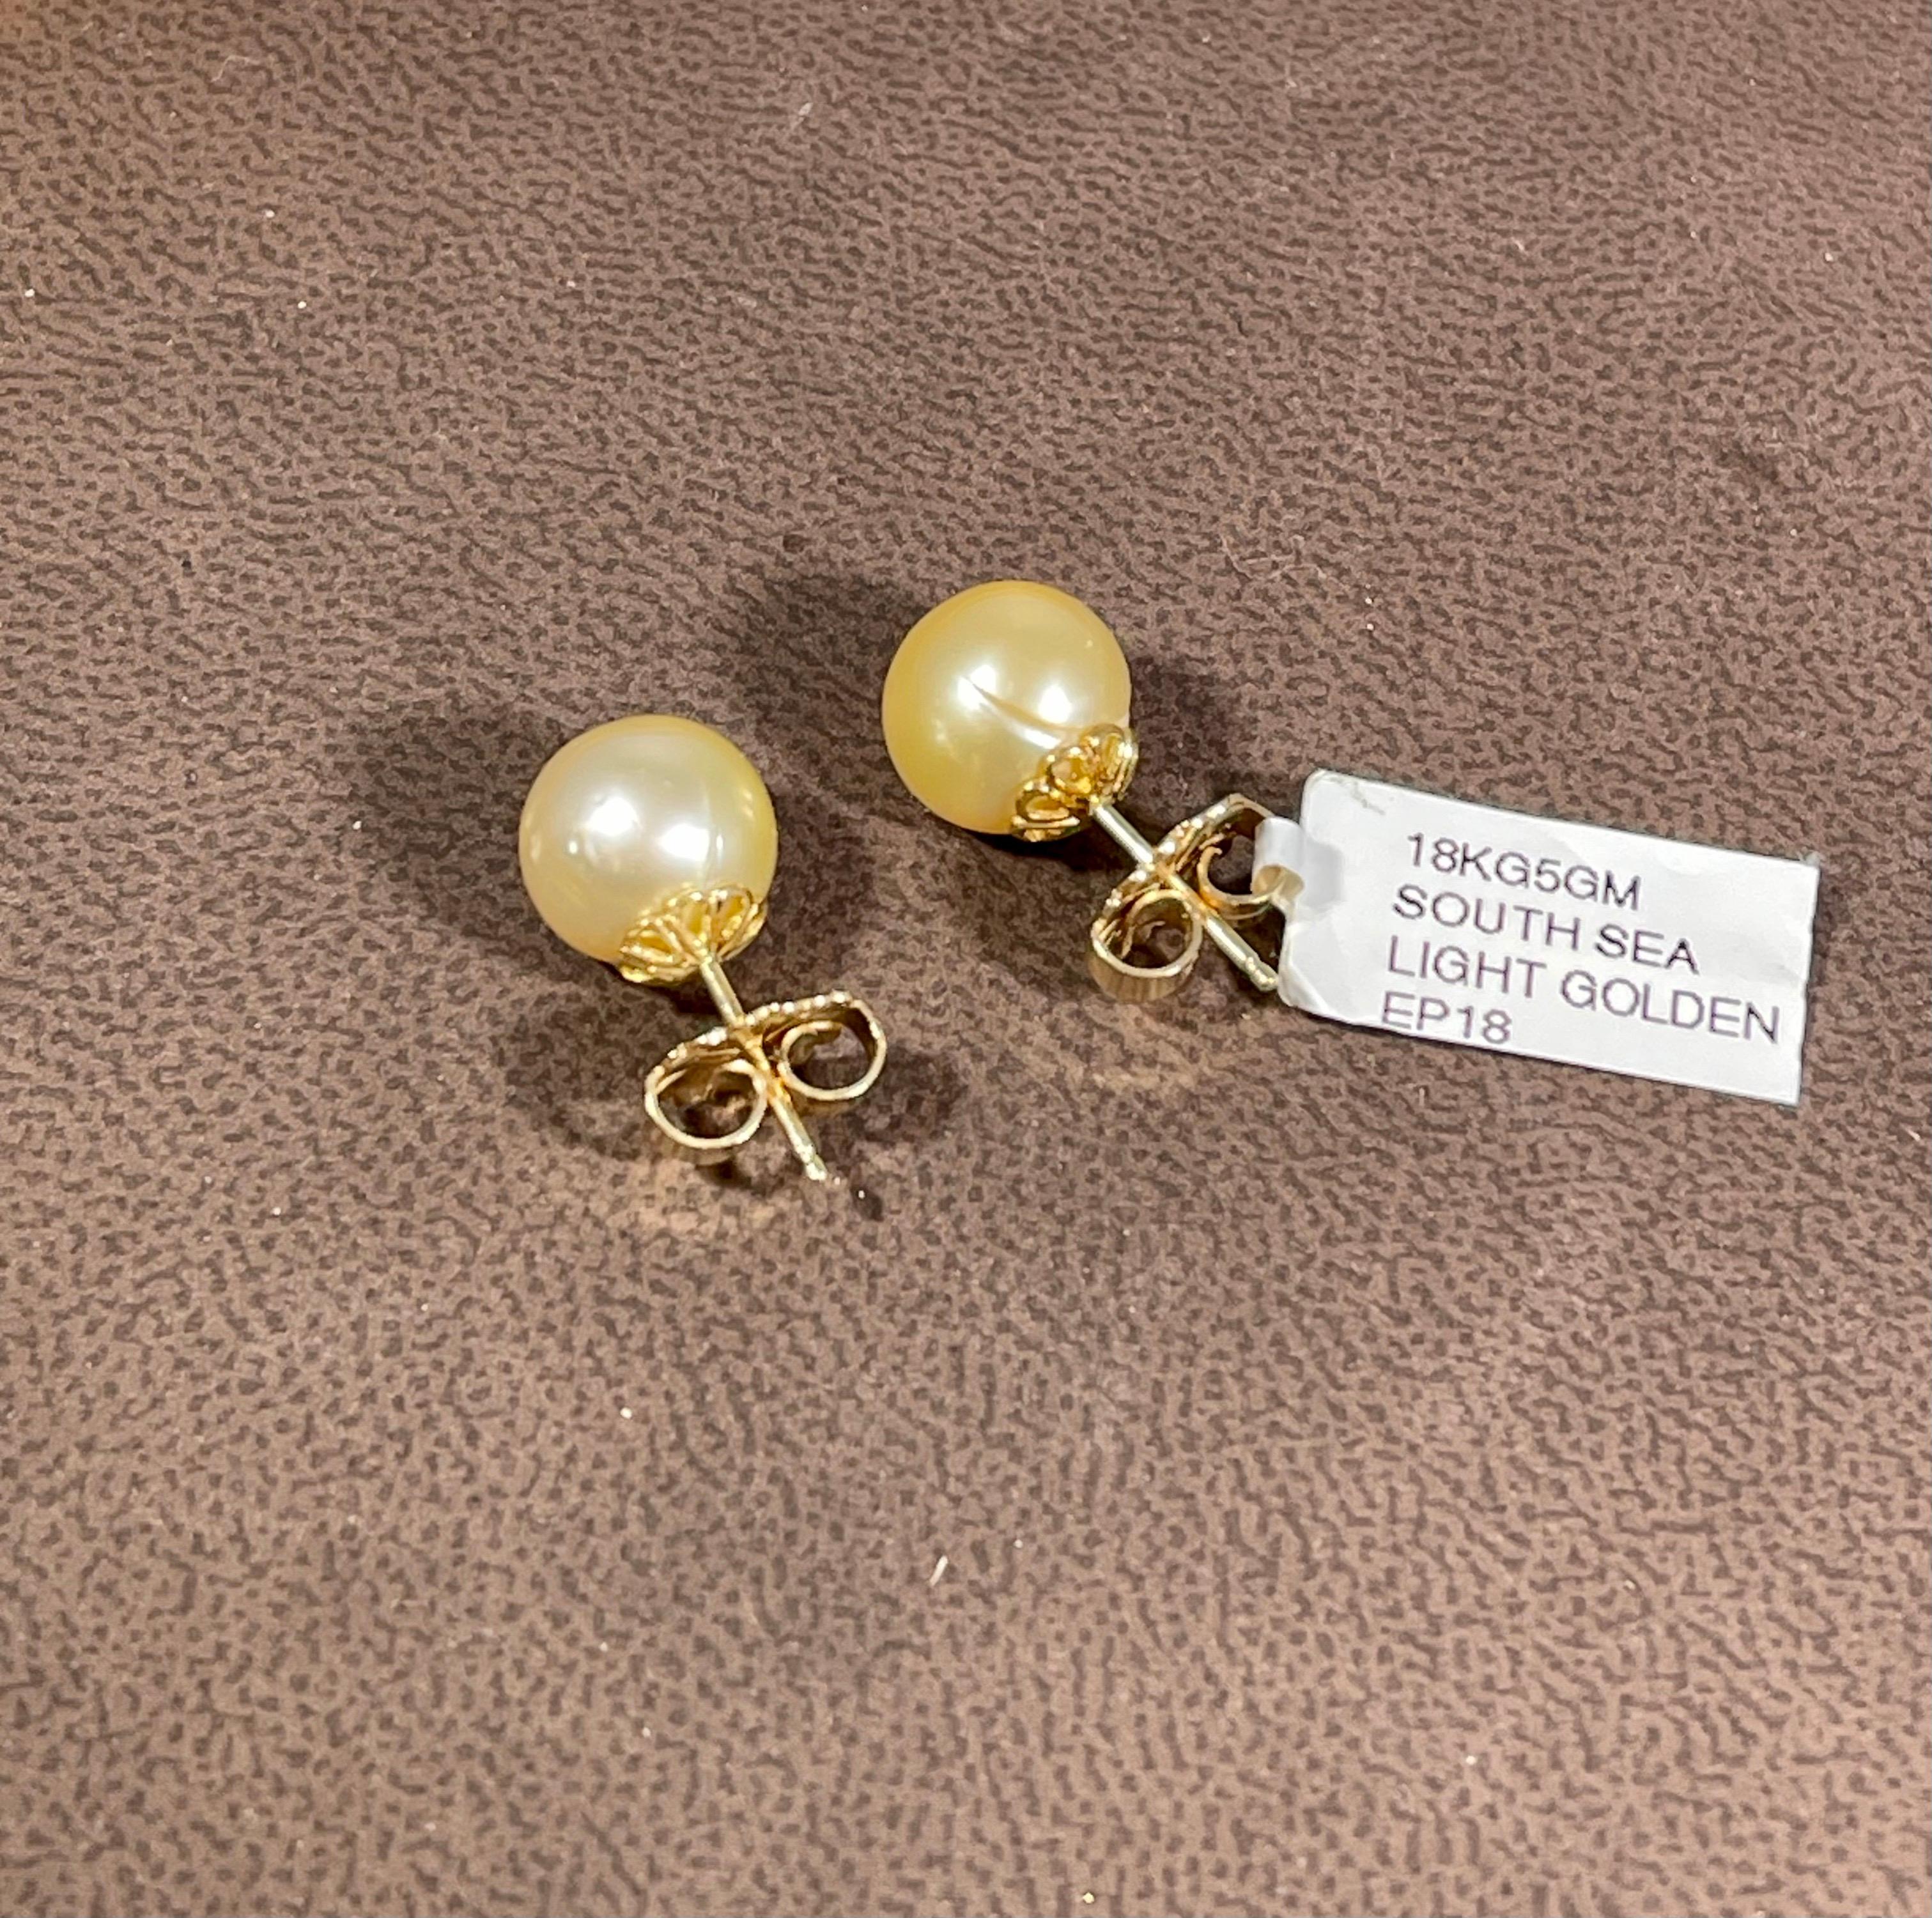 Golden South Sea Pearl Stud Earrings 18 Karat Yellow Gold In Excellent Condition For Sale In New York, NY